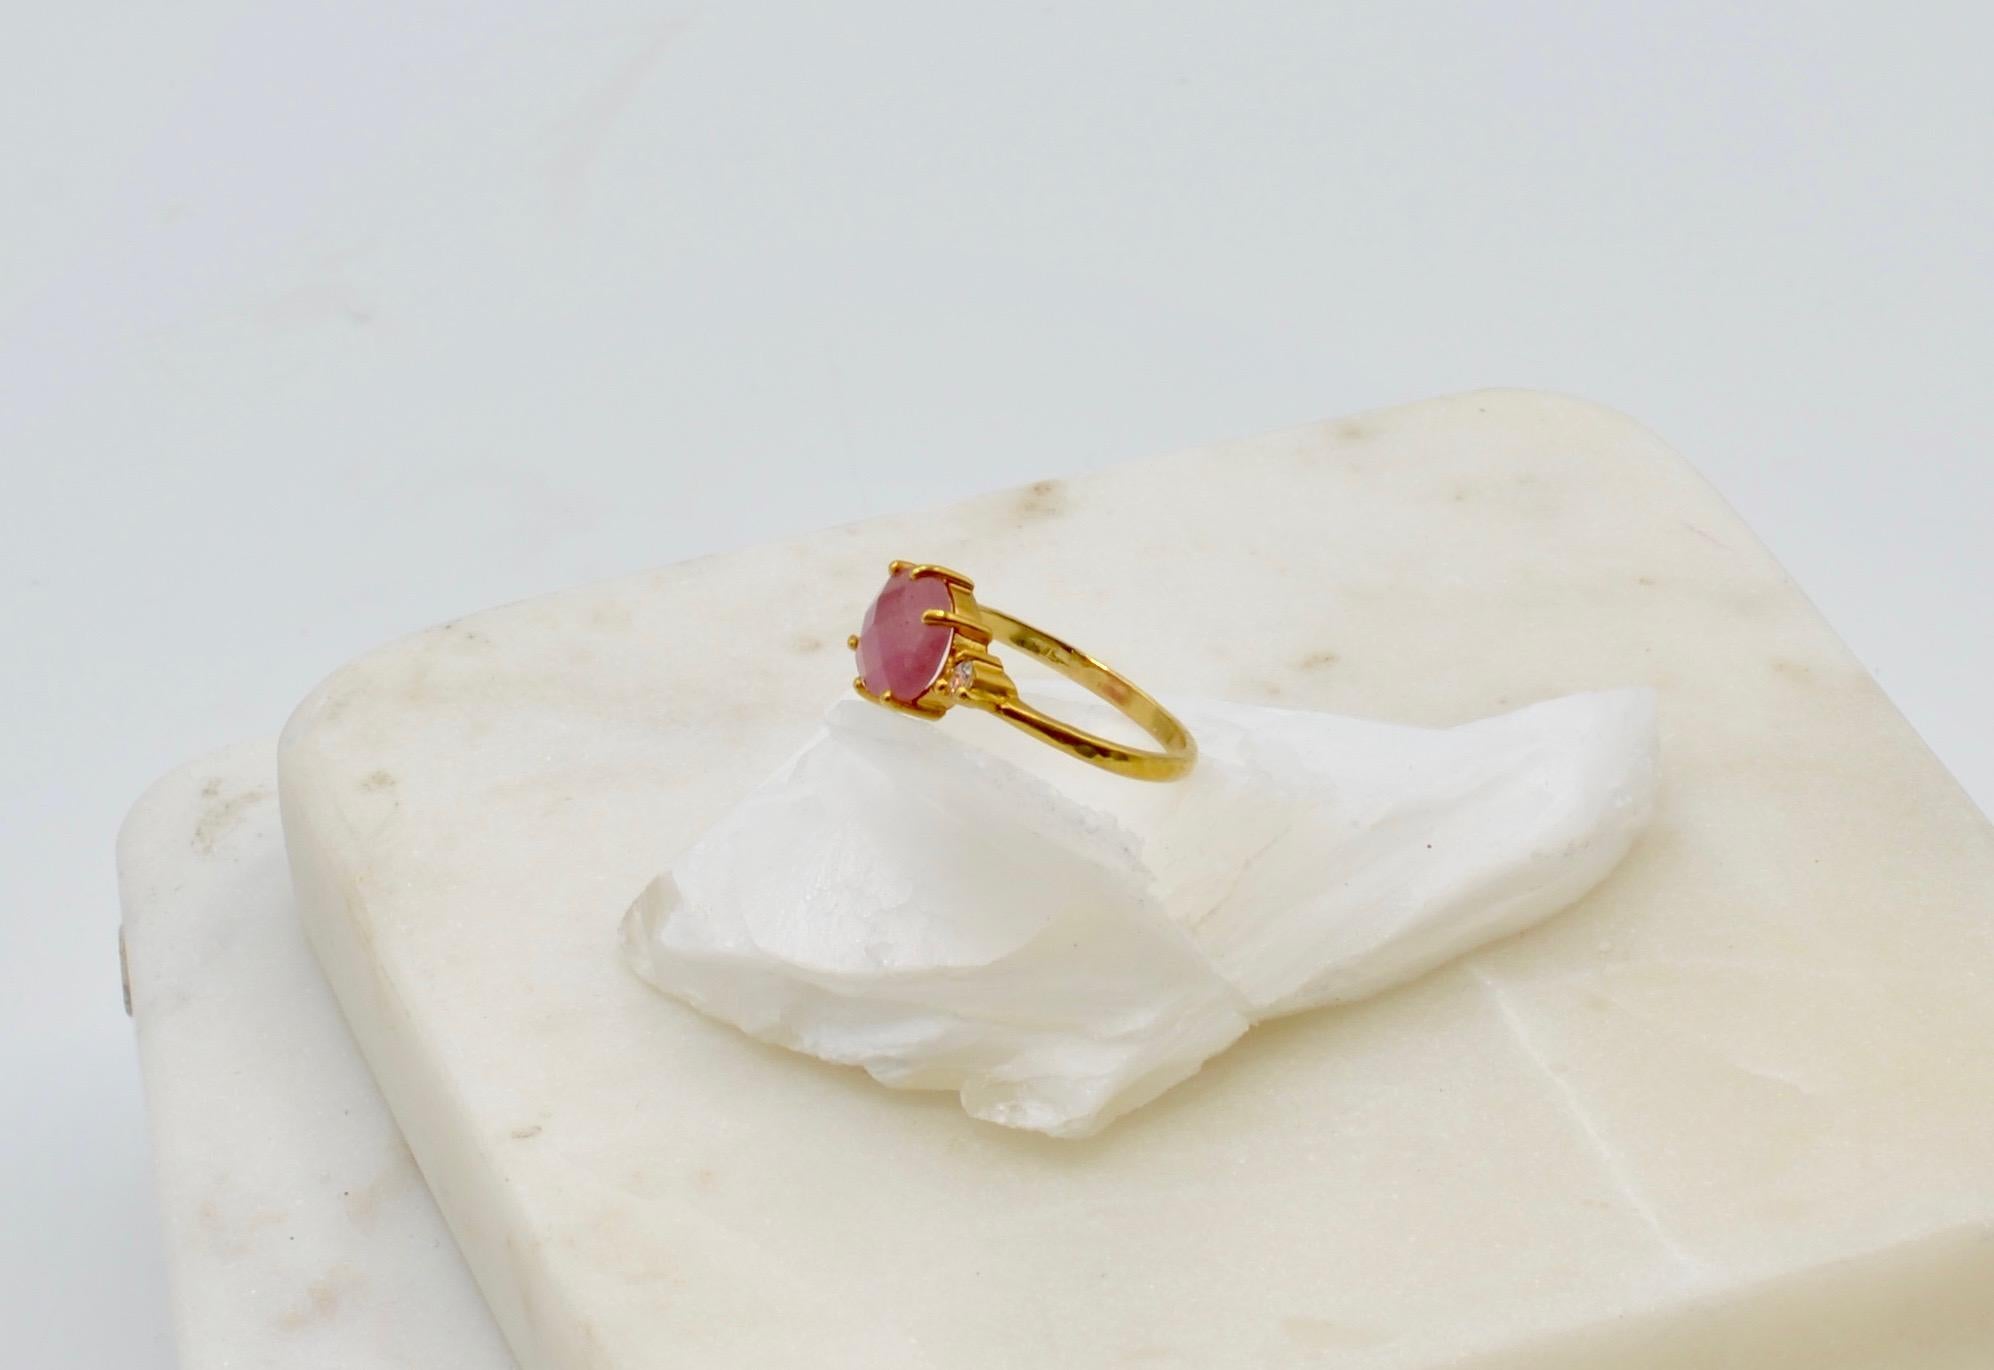 This beautiful pink sapphire is rose cut and measures aprox. 2.6 carats with two very bright white accent diamonds set in 14 karat gold.  It is an alternative engagement ring or your favorite every day ring. The ring is a size 6 3/4 and can be sized